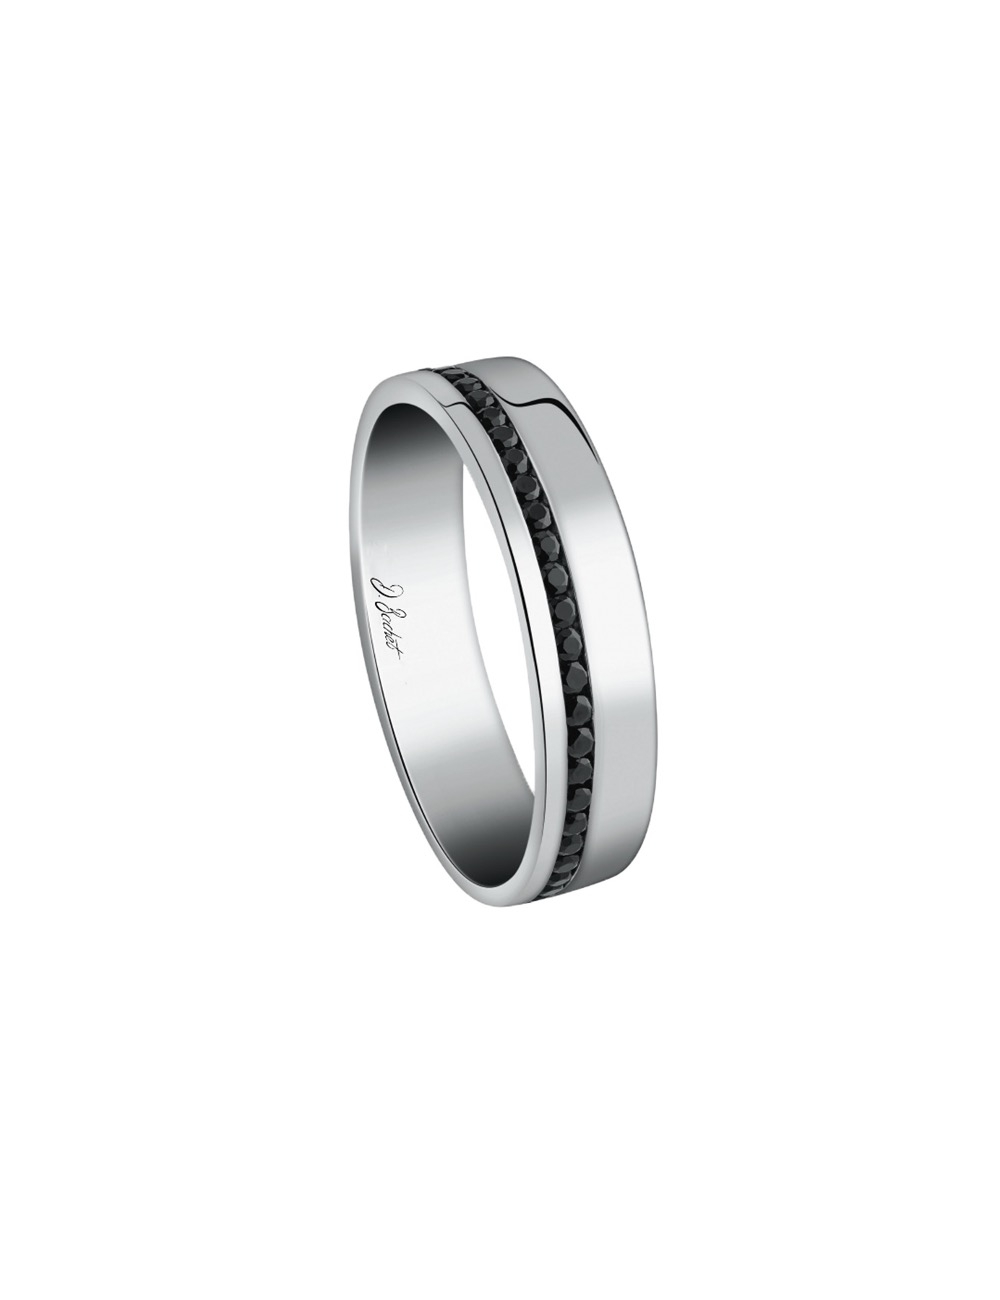 A wedding ring for men ultra modern and elegant with the offset line of black diamonds.